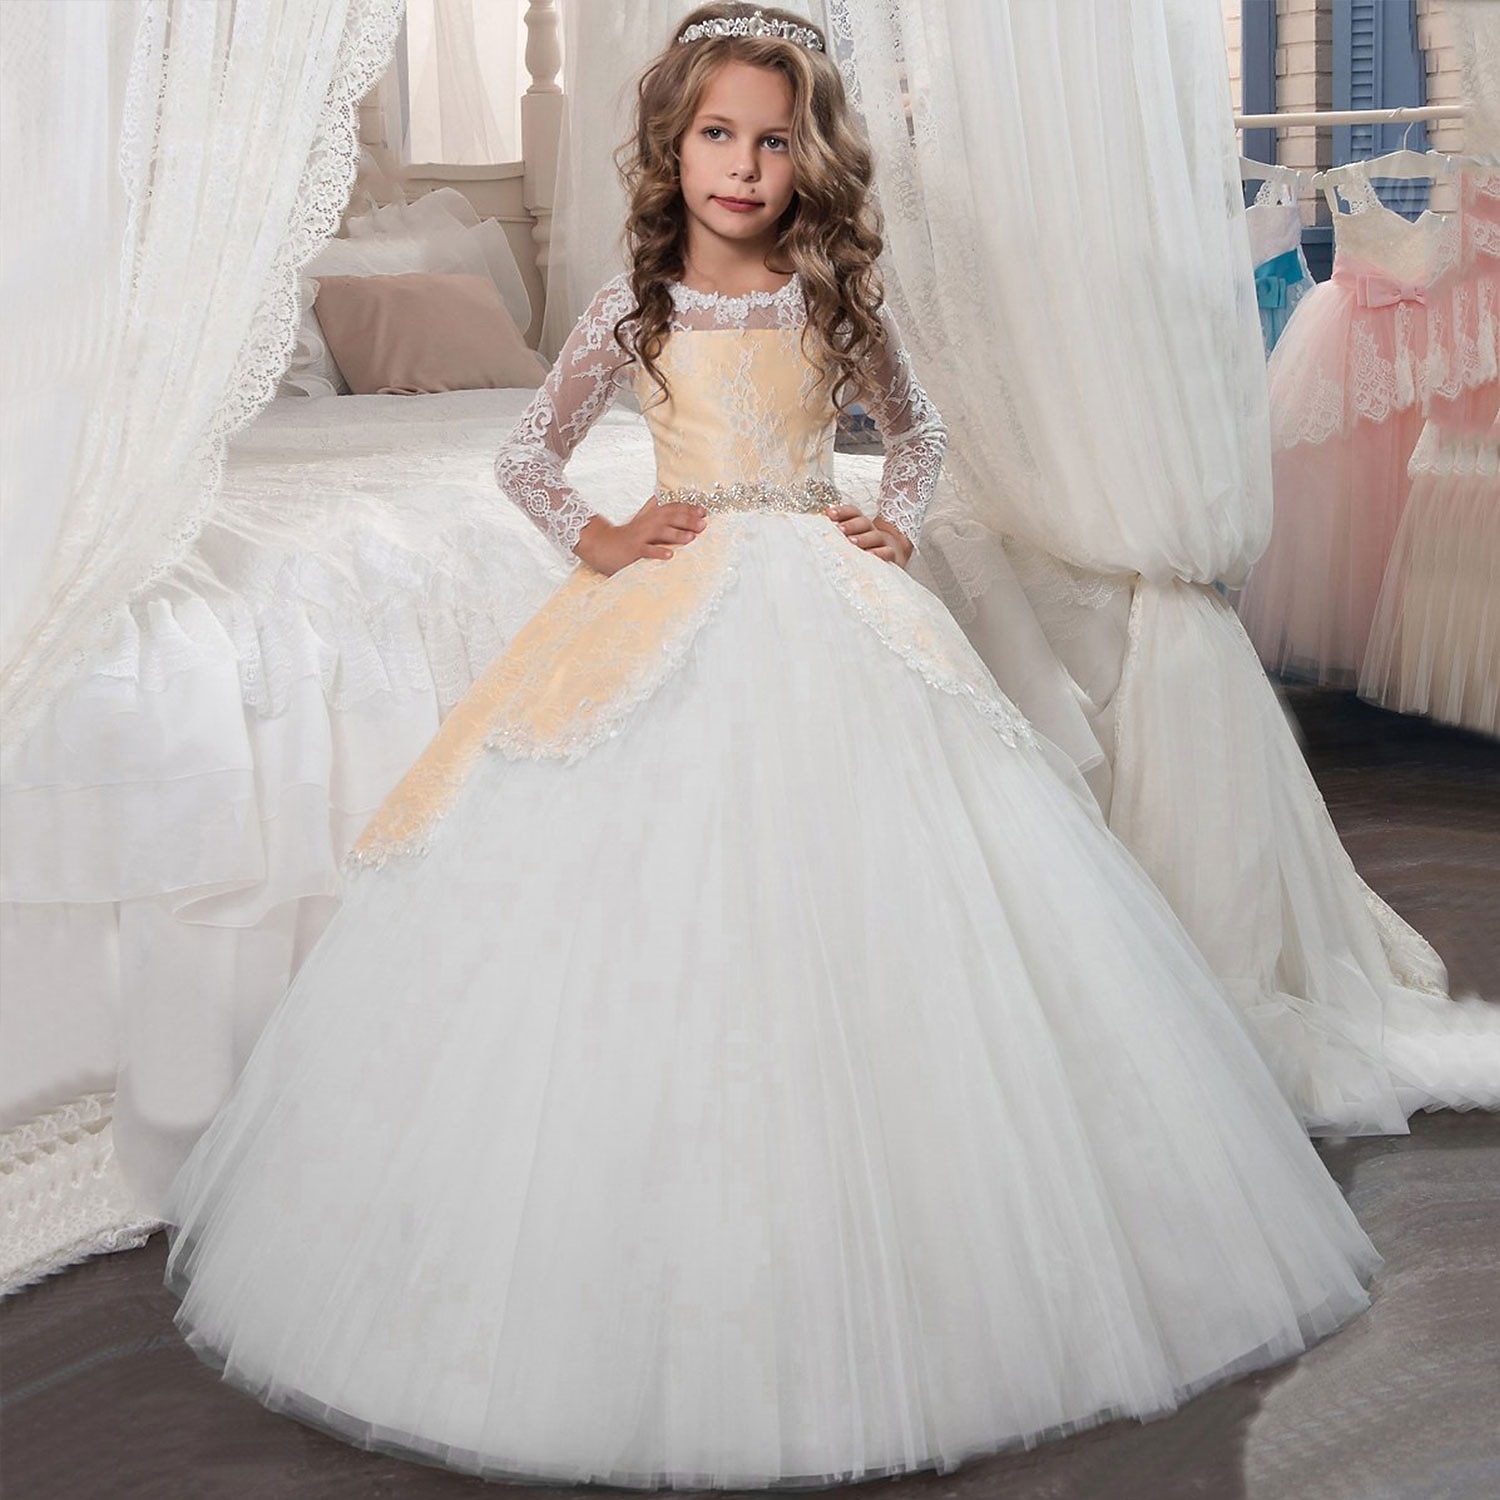 Sarvda Baby Girls Gown Dress For Kids Angel Wedding Birthday net frock Dress  (30 No.) 7-8 yr at Rs 453 | Fancy Costume in Ghaziabad | ID: 2849889185273